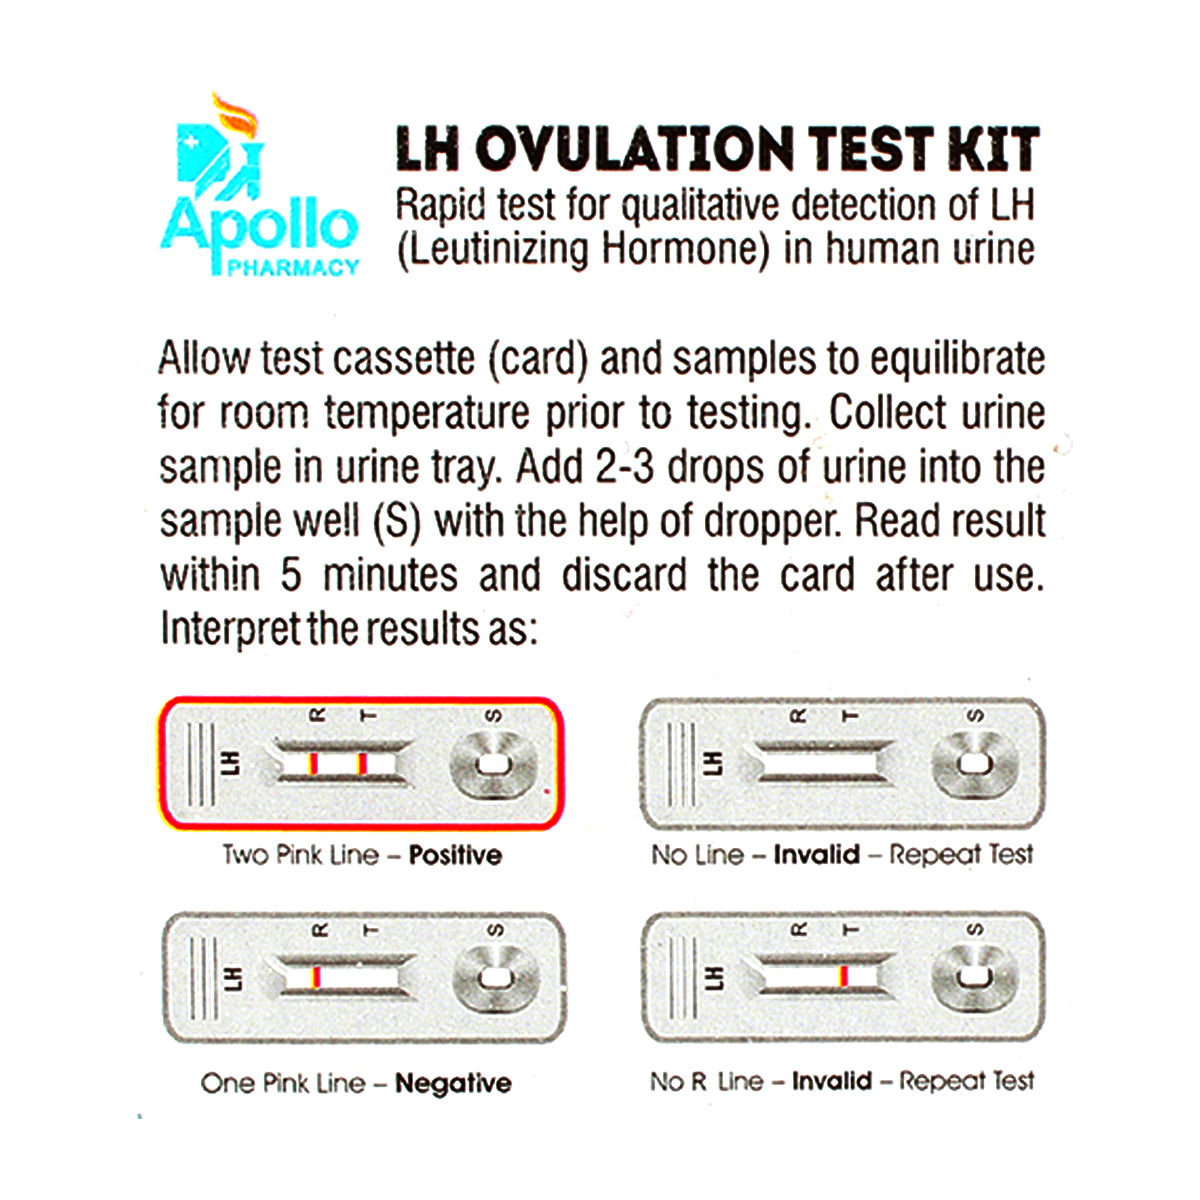 Apollo Pharmacy LH Ovulation 5 Day Test Kit, 1 Kit, Pack of 1 